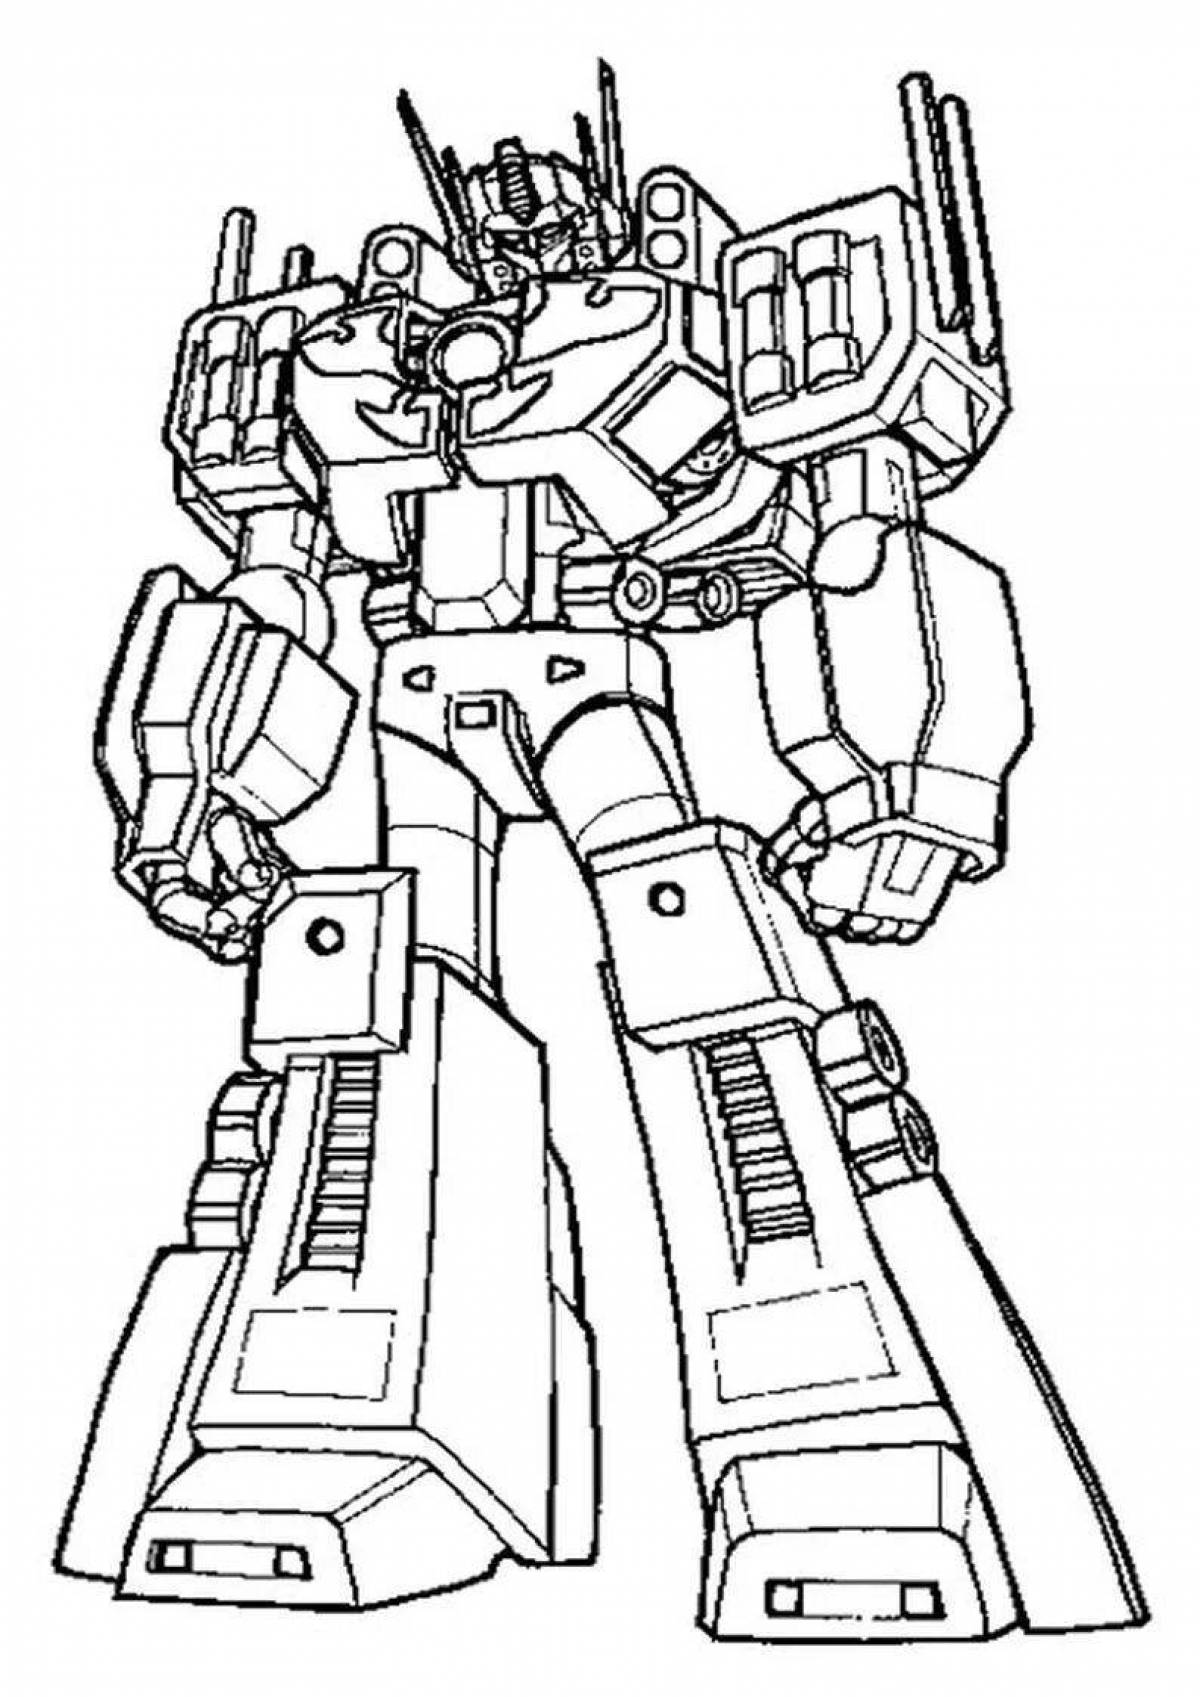 Optimus robot adorable coloring page